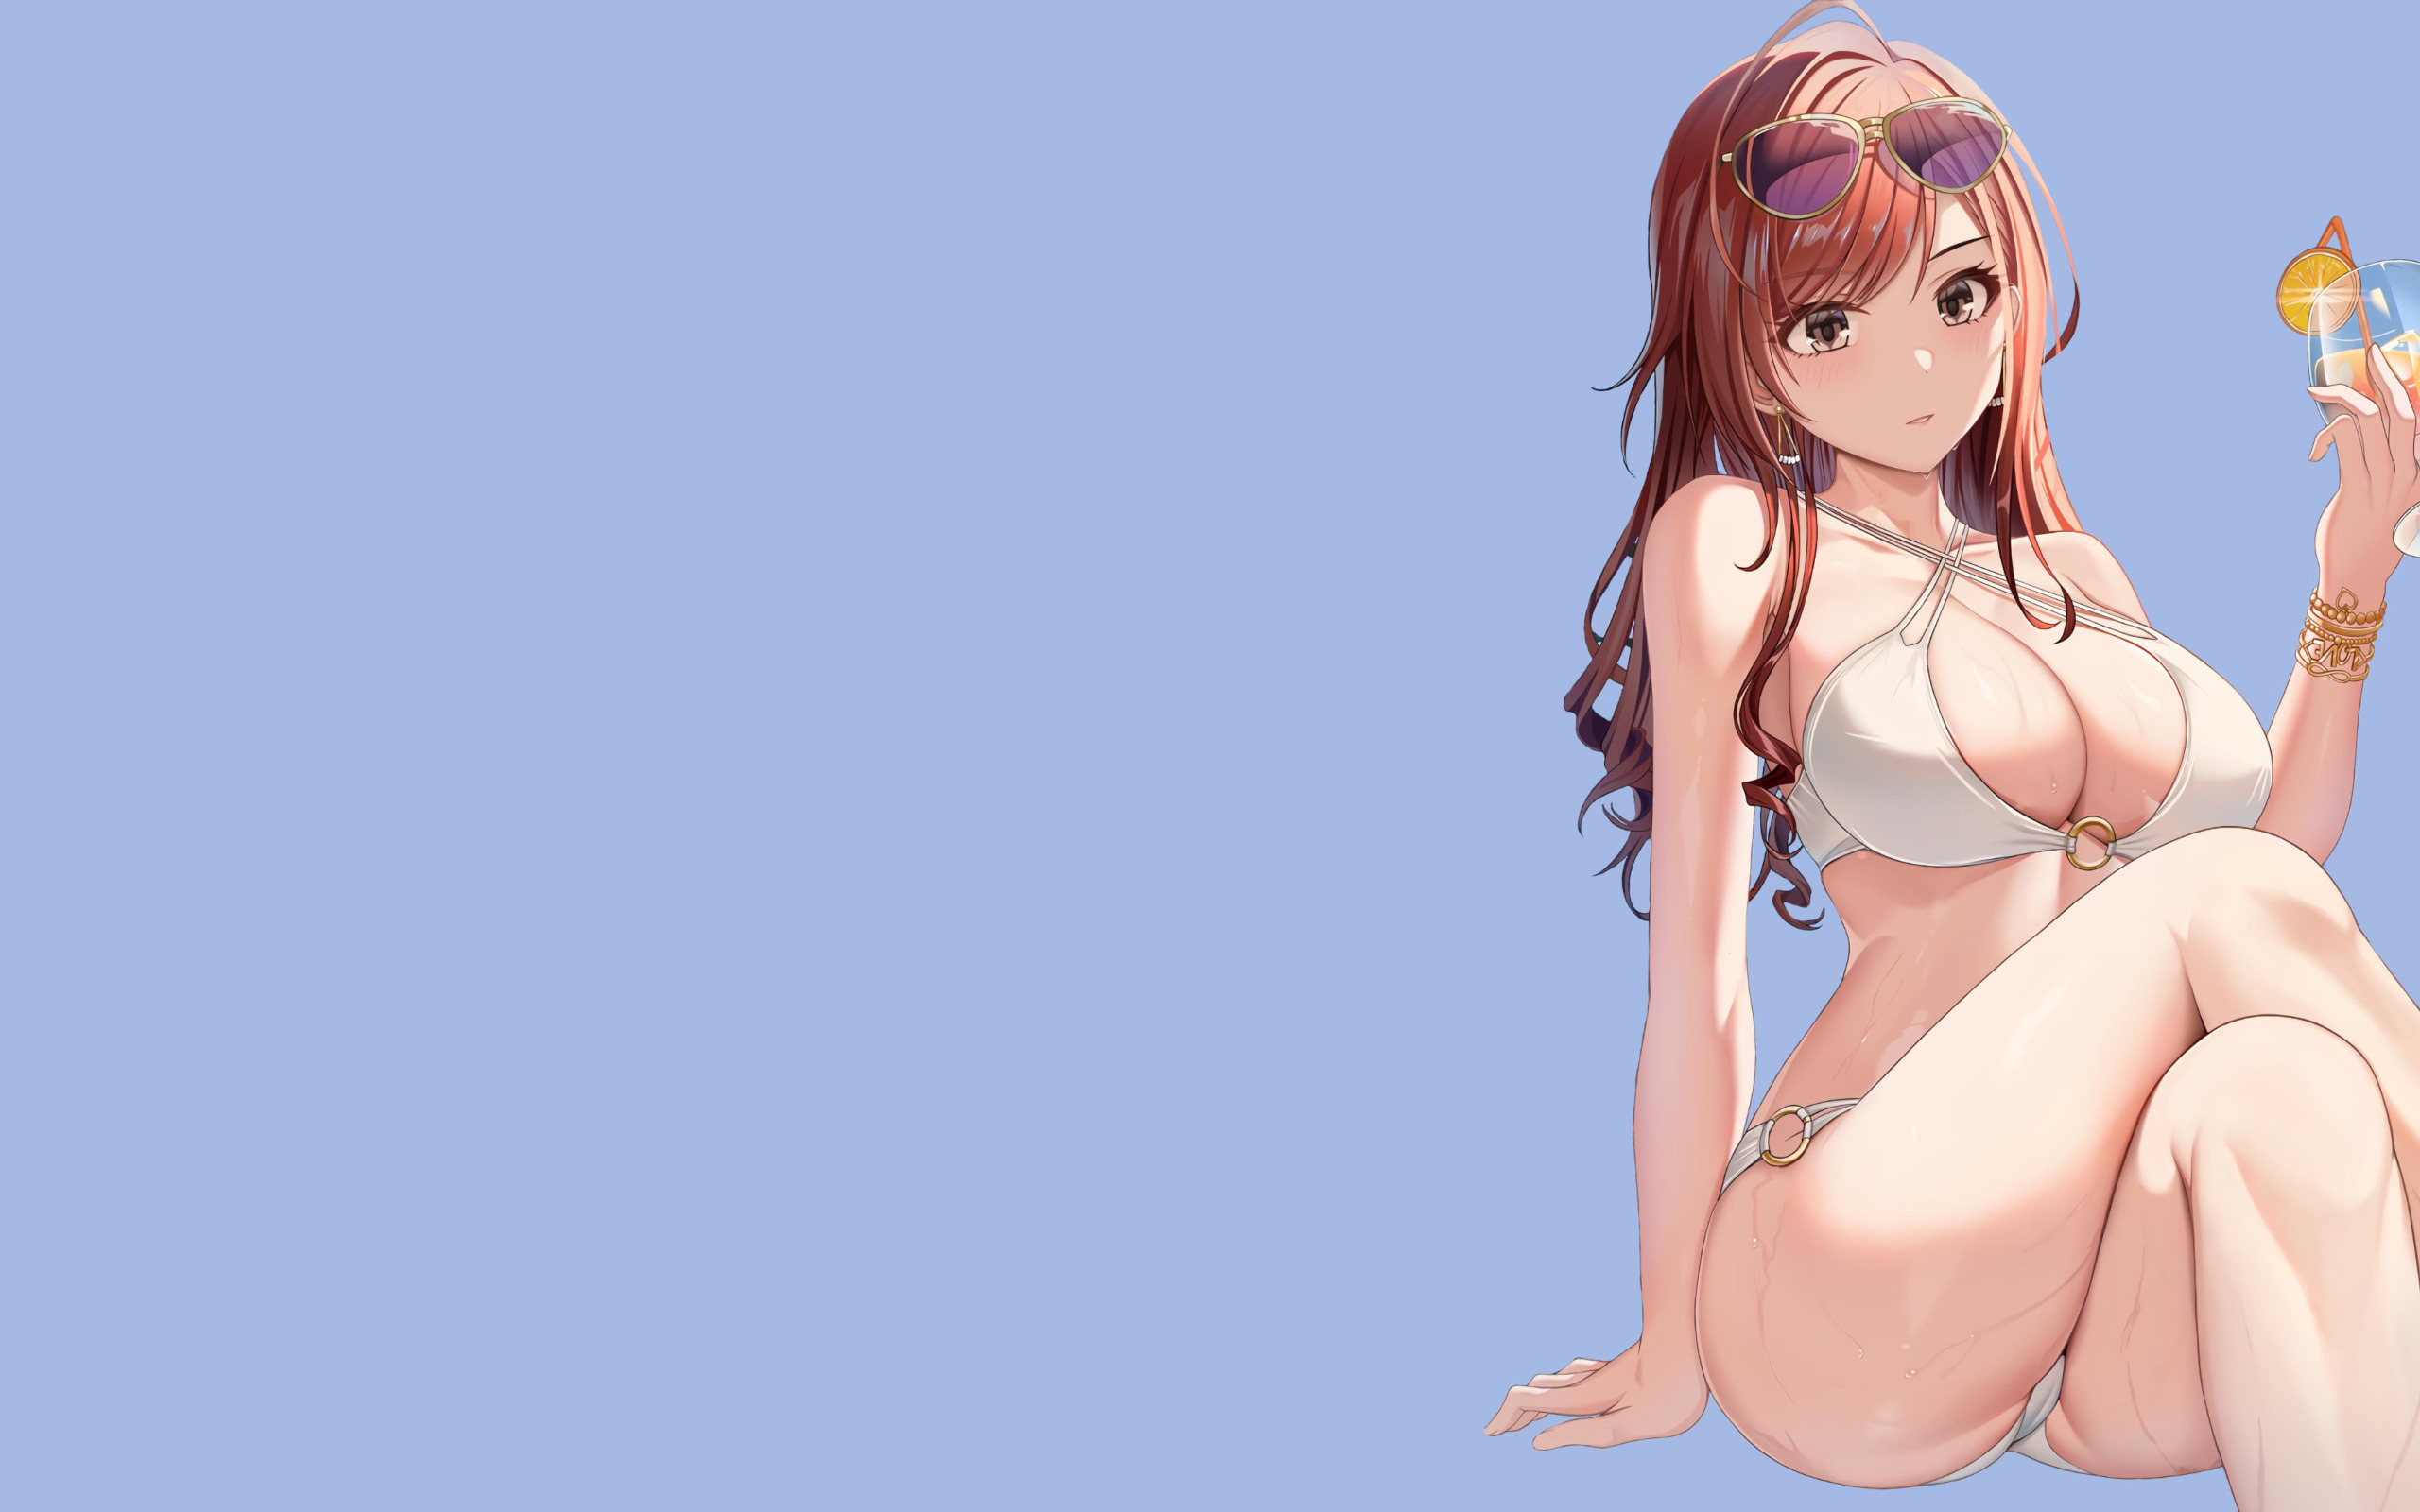 Download wallpaper girl, hot, sexy, Anime, bikini, poolside, drinking,  section seinen in resolution 2560x1600